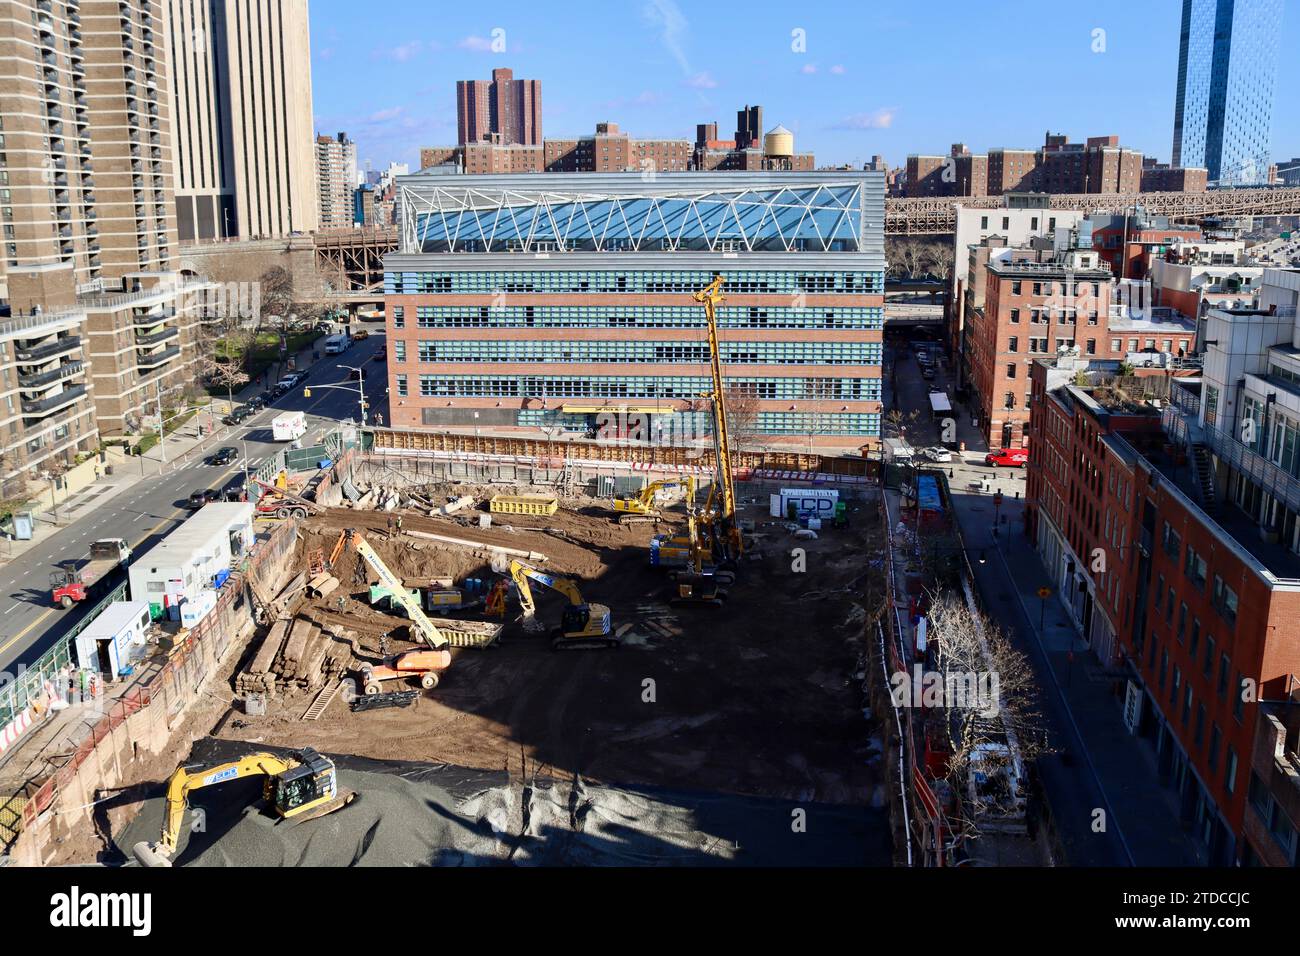 New construction between Pearl street, Water street, Peck Slip and Beekman street at South Street Seaport area in lower Manhattan, New York Stock Photo